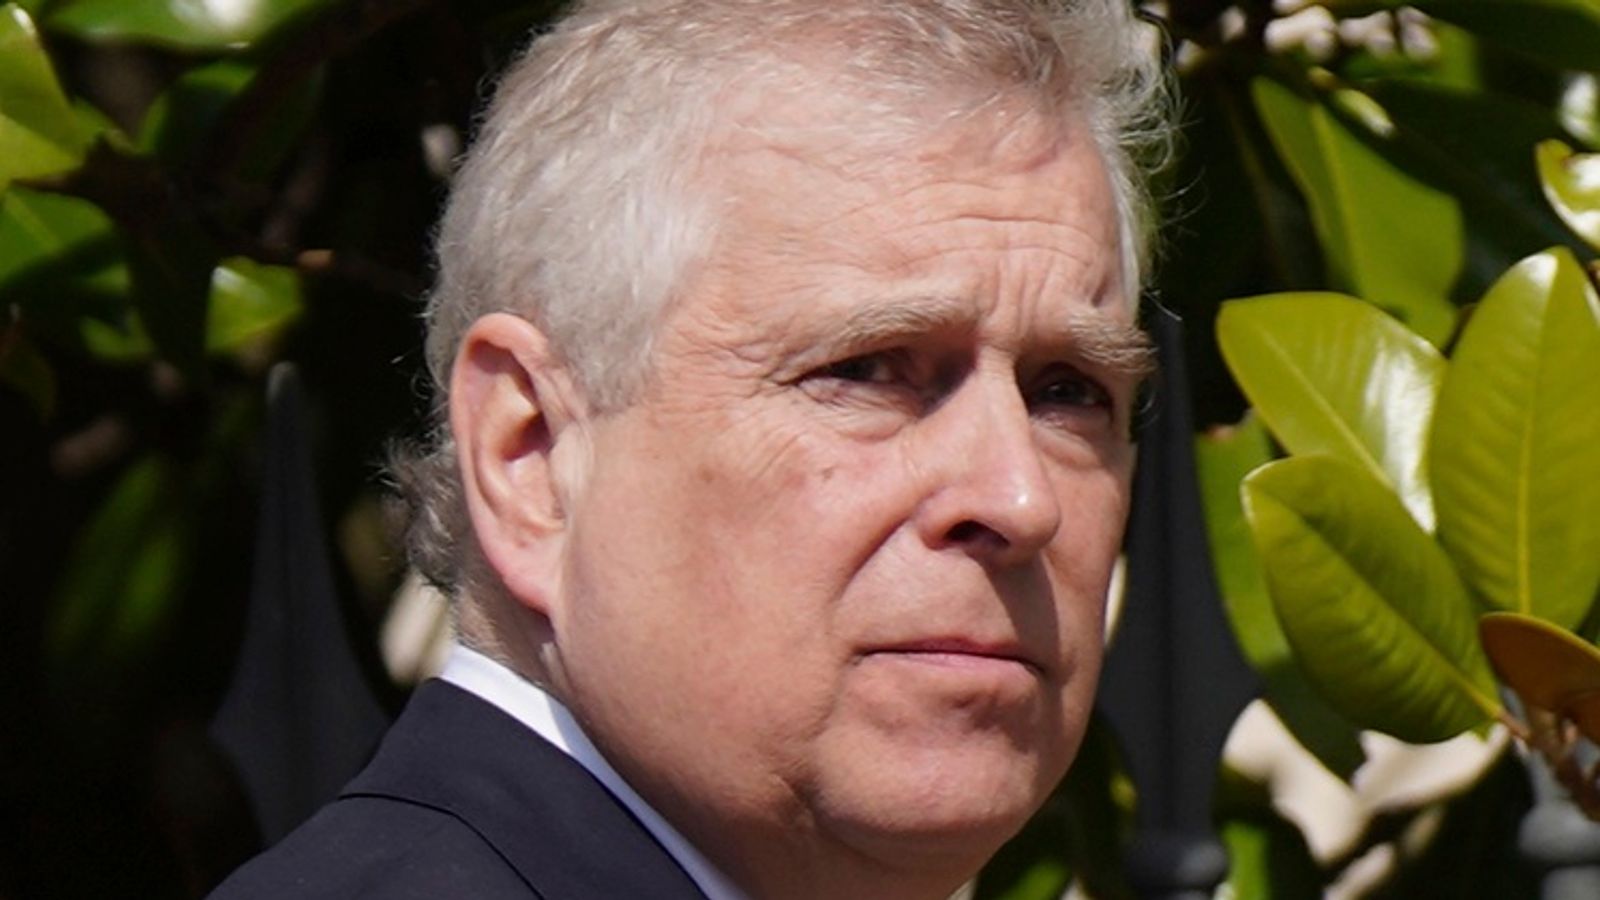 Prince Andrew had 'daily massages' when visiting Jeffrey Epstein's estate, according to housekeeper